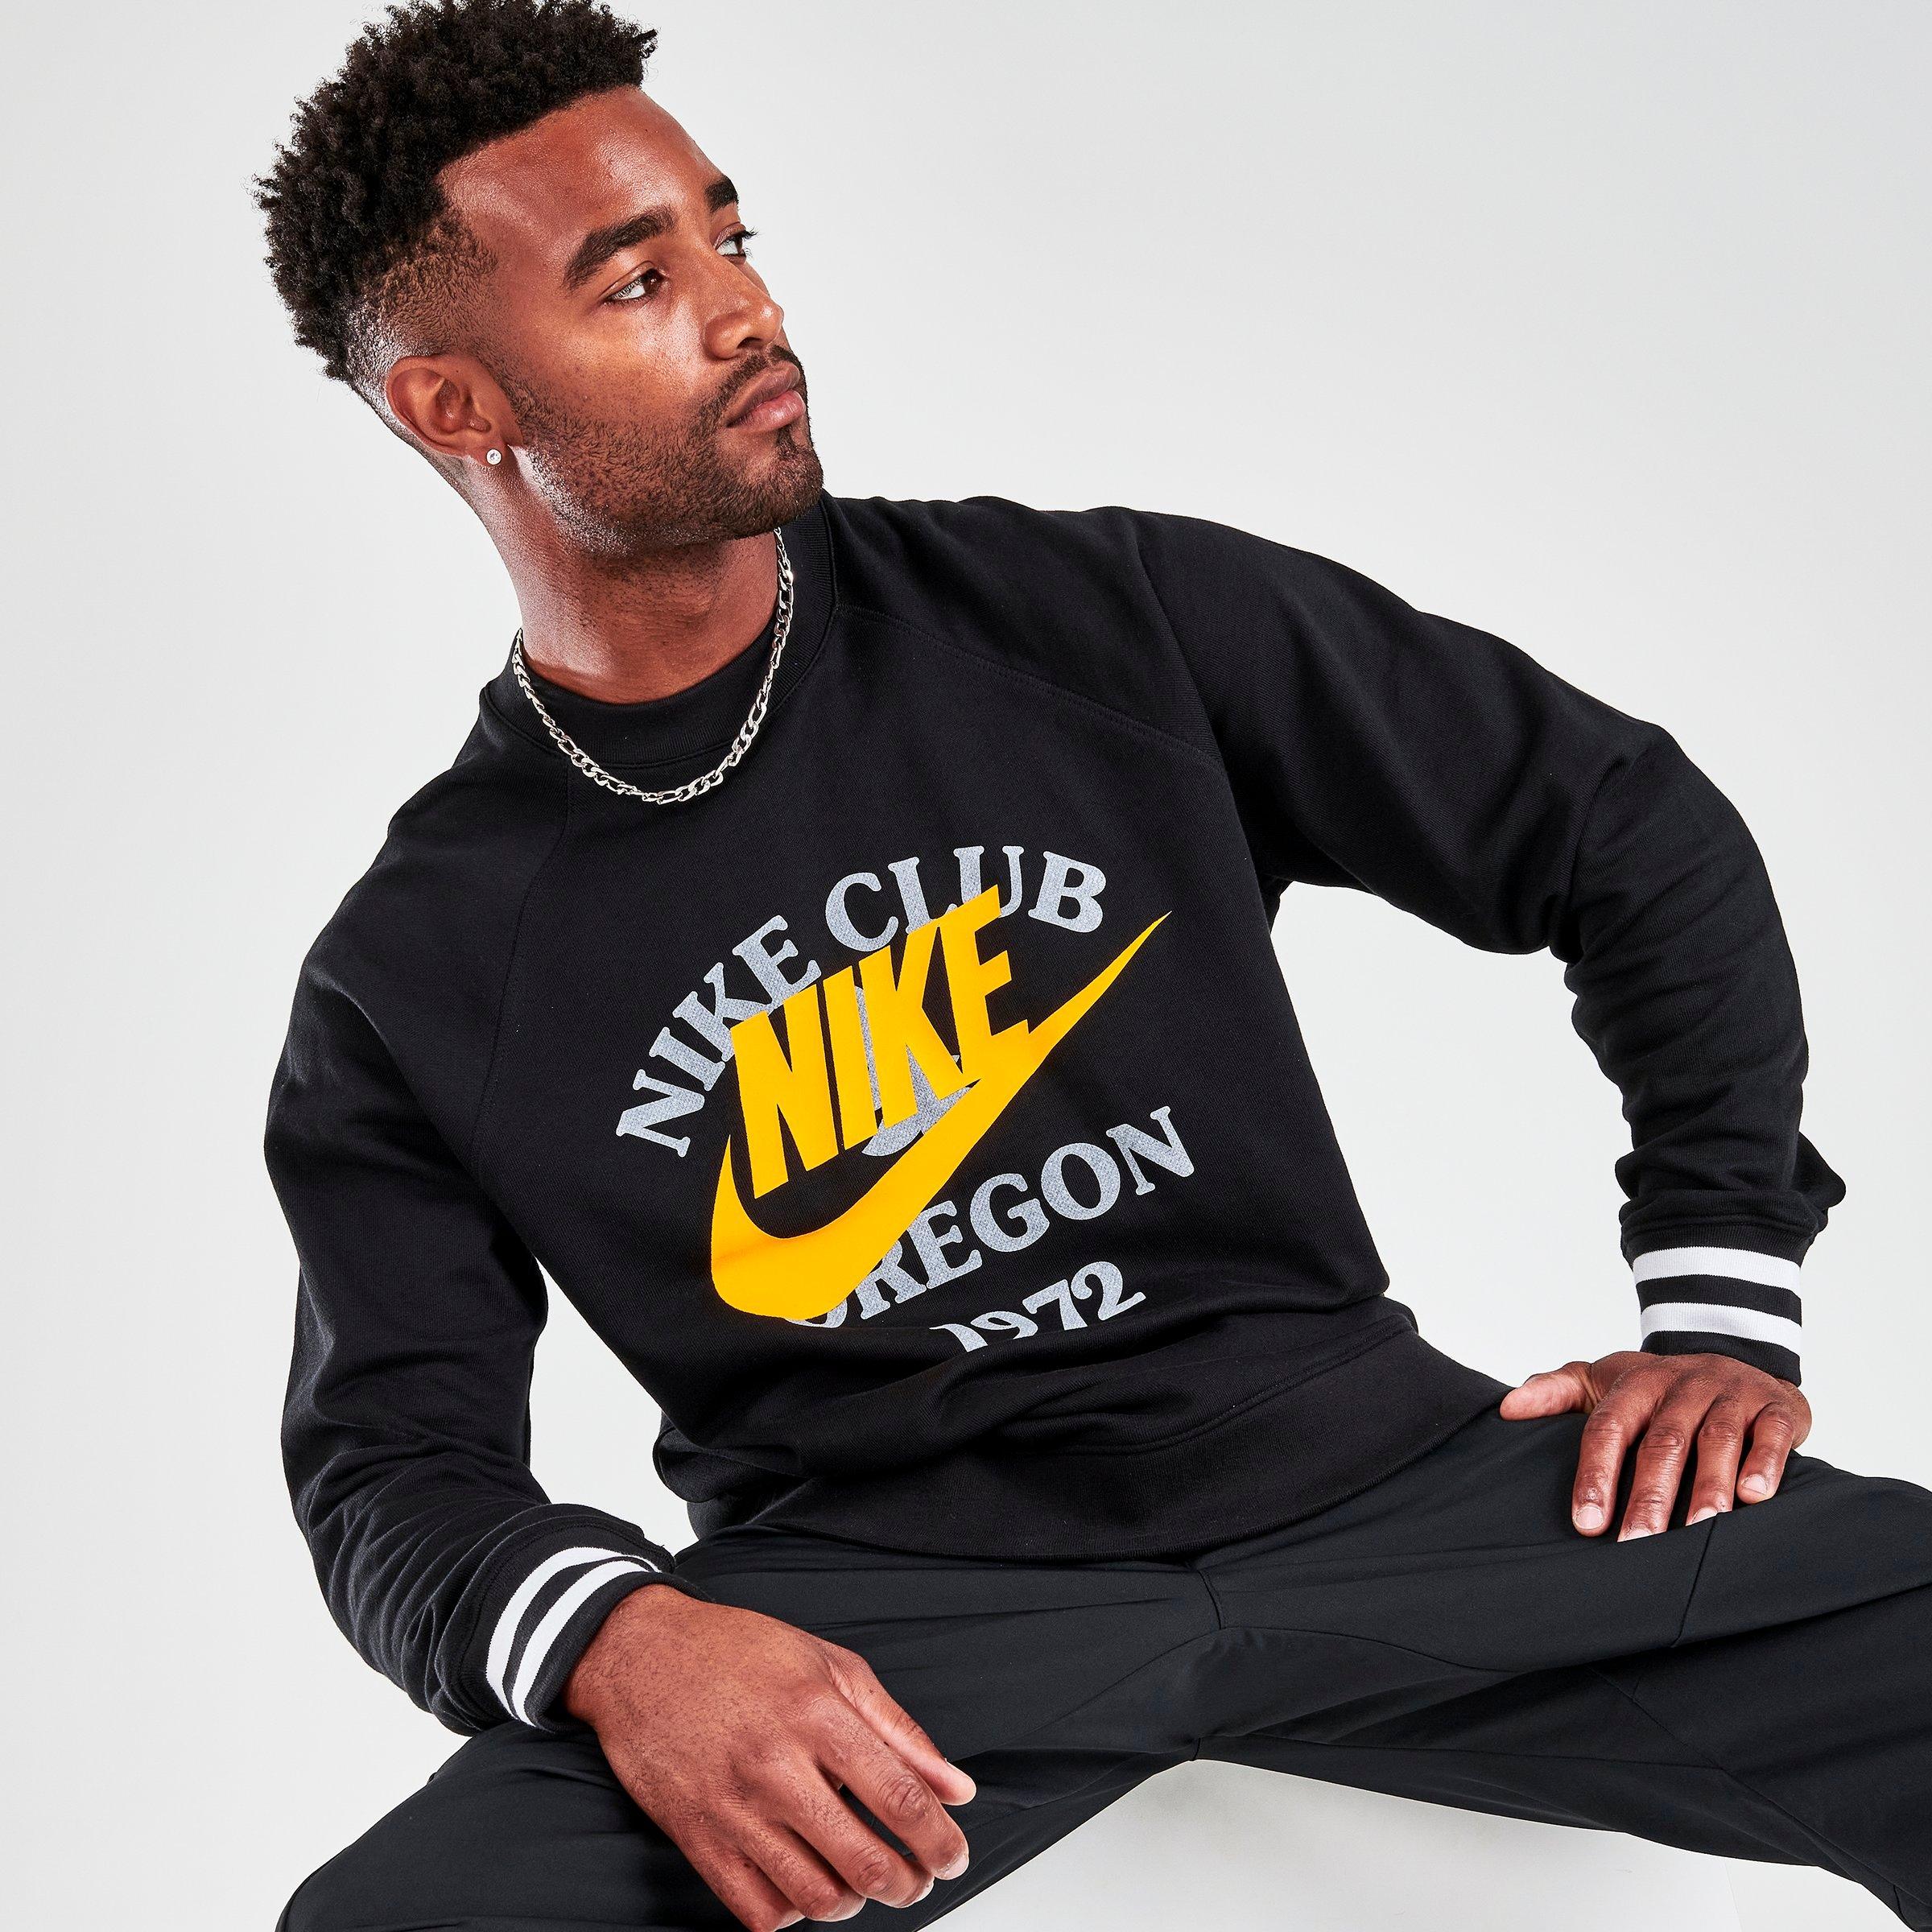 UPC 195239014901 product image for Nike Men's Sportswear Stacked Prints French Terry Crewneck Sweatshirt in Black/B | upcitemdb.com